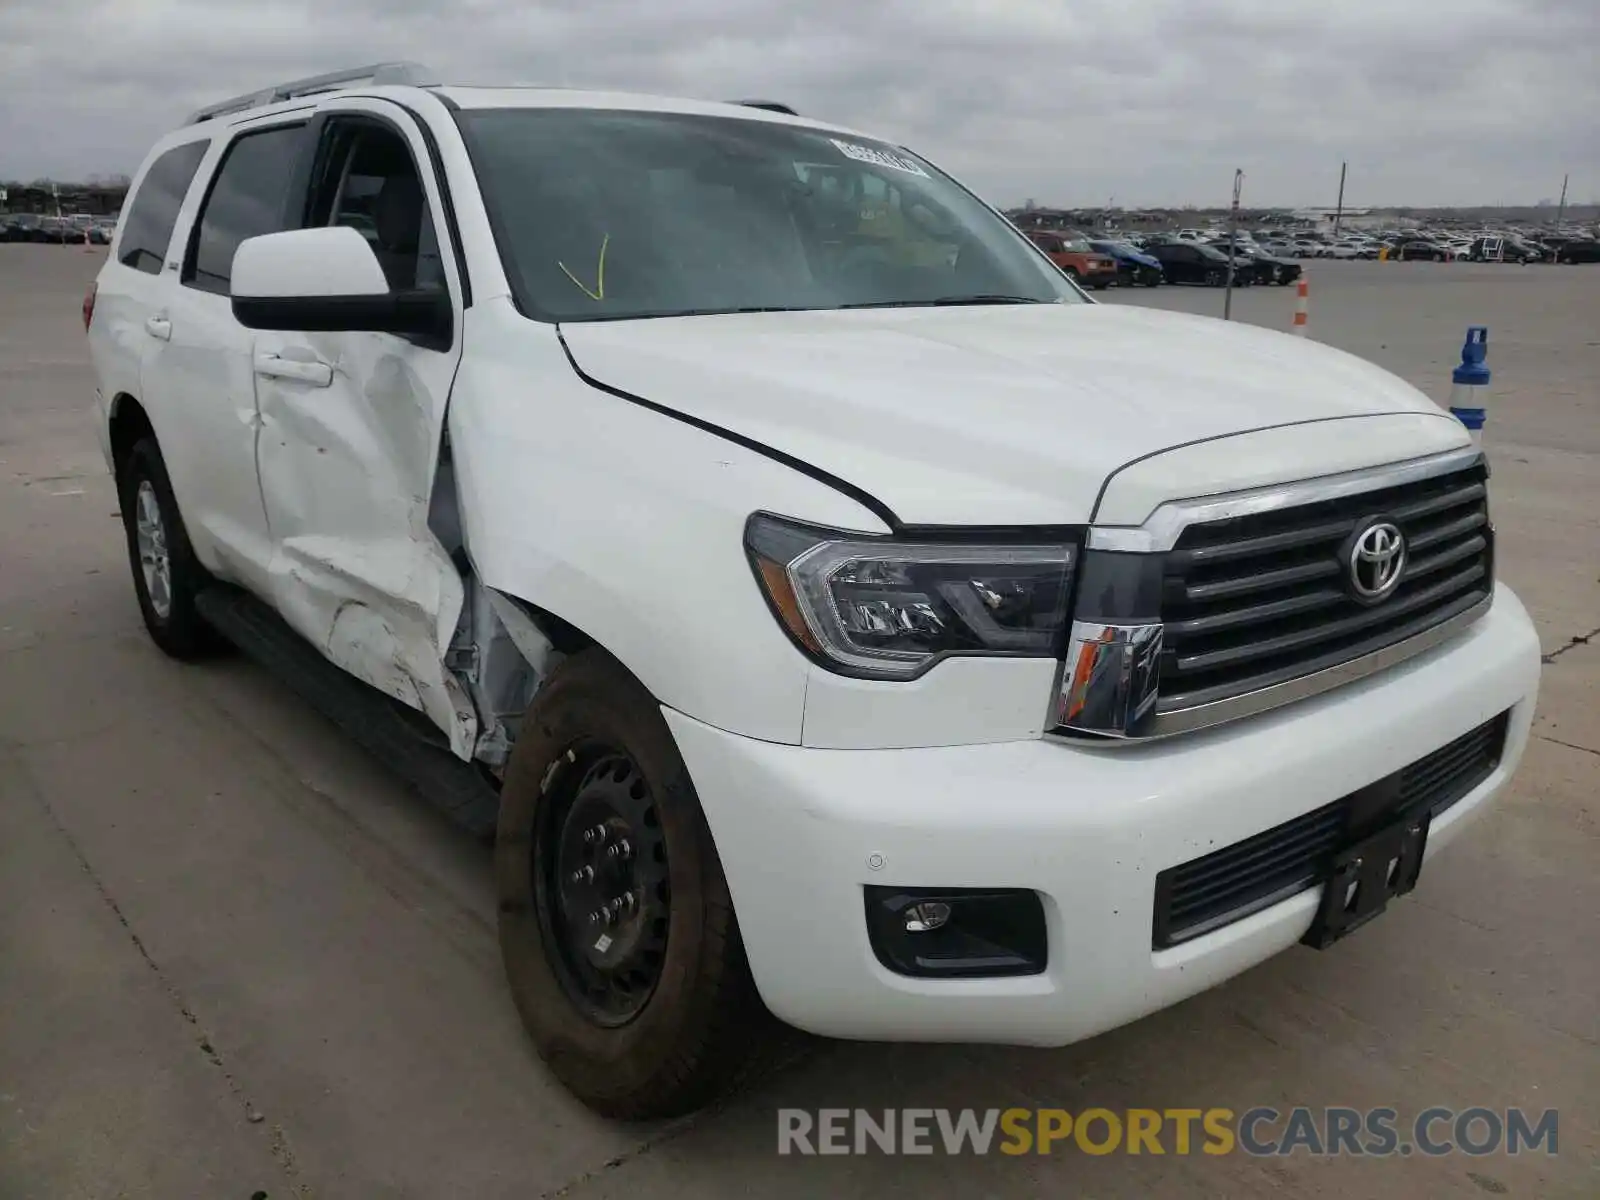 1 Photograph of a damaged car 5TDBY5G18KS170068 TOYOTA SEQUOIA 2019